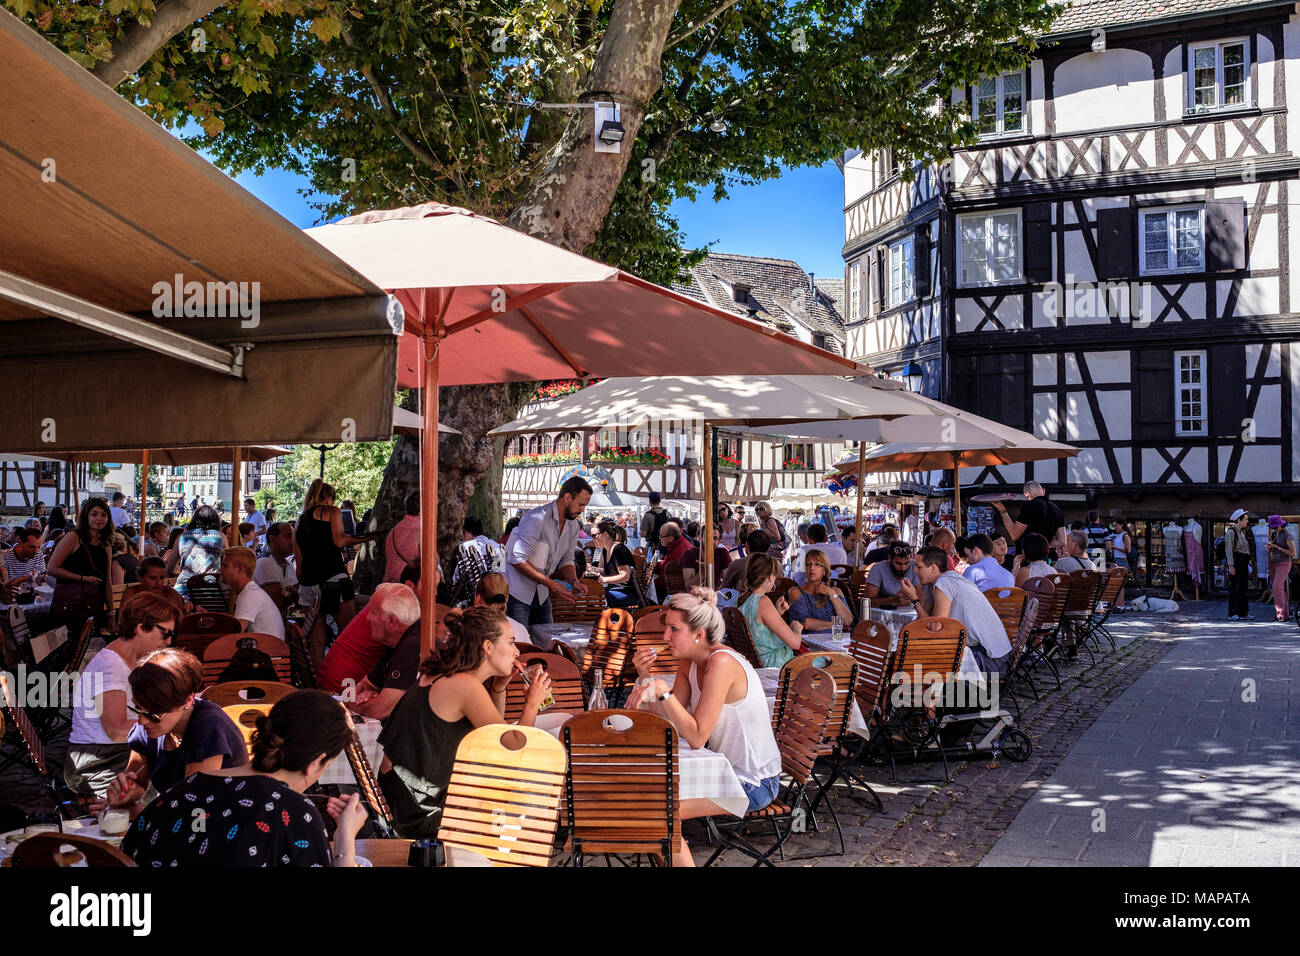 Alfresco cafe terrace, customers lunching, half-timbered houses, place Benjamin Zix square, La Petite France, Strasbourg, Alsace, France, Europe, Stock Photo